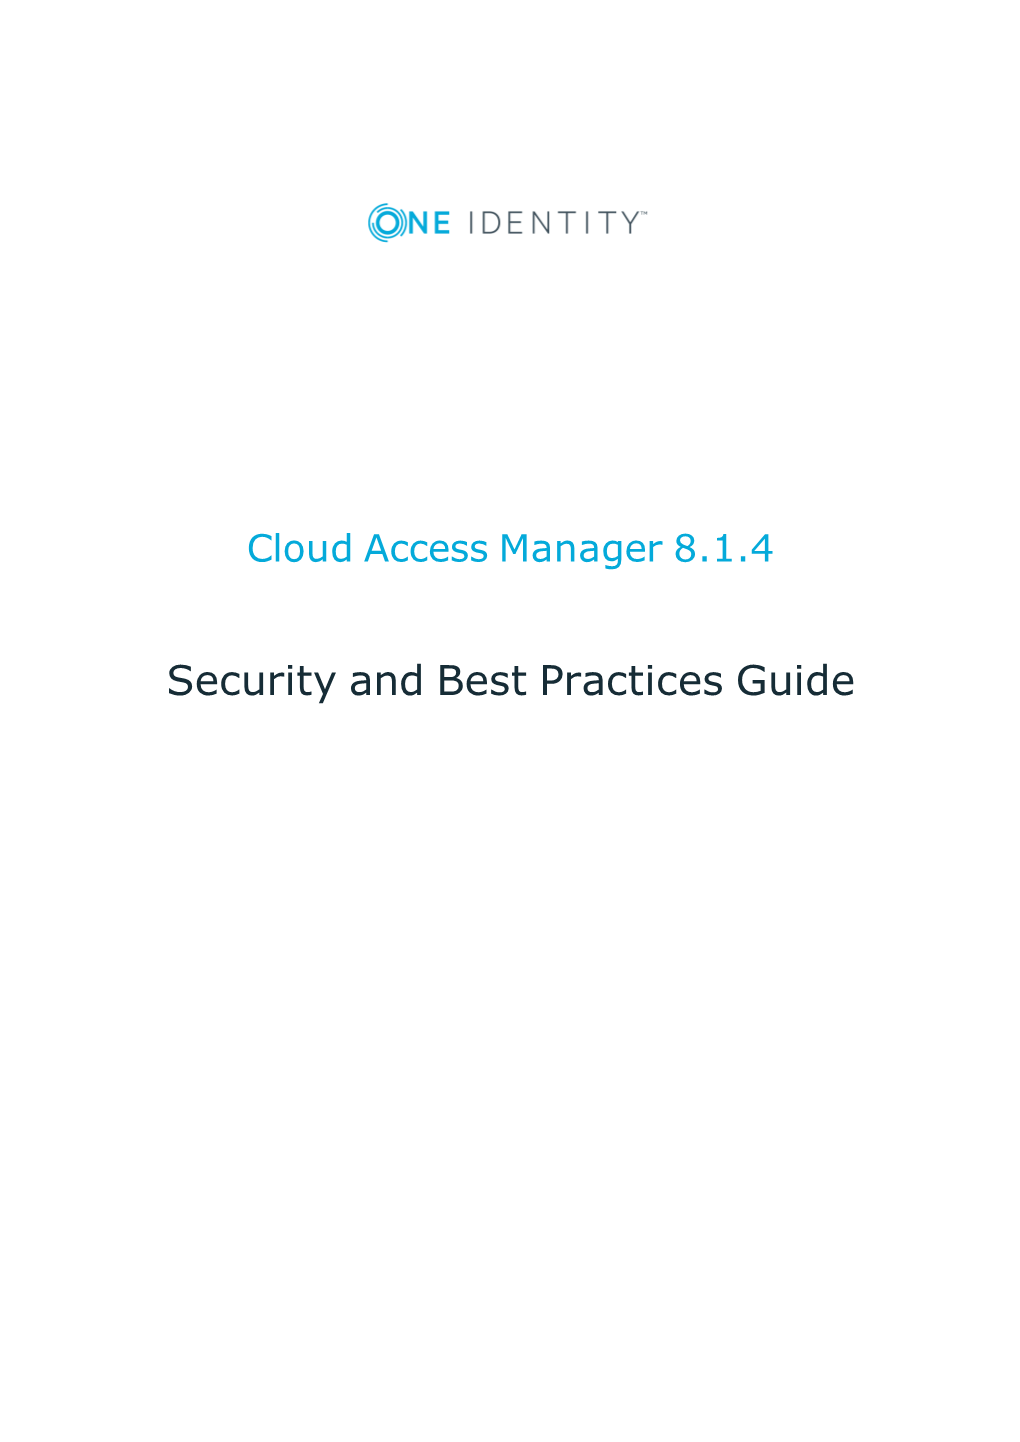 Cloud Access Manager Security and Best Practices Guide Updated - November 2018 Version - 8.1.4 Contents